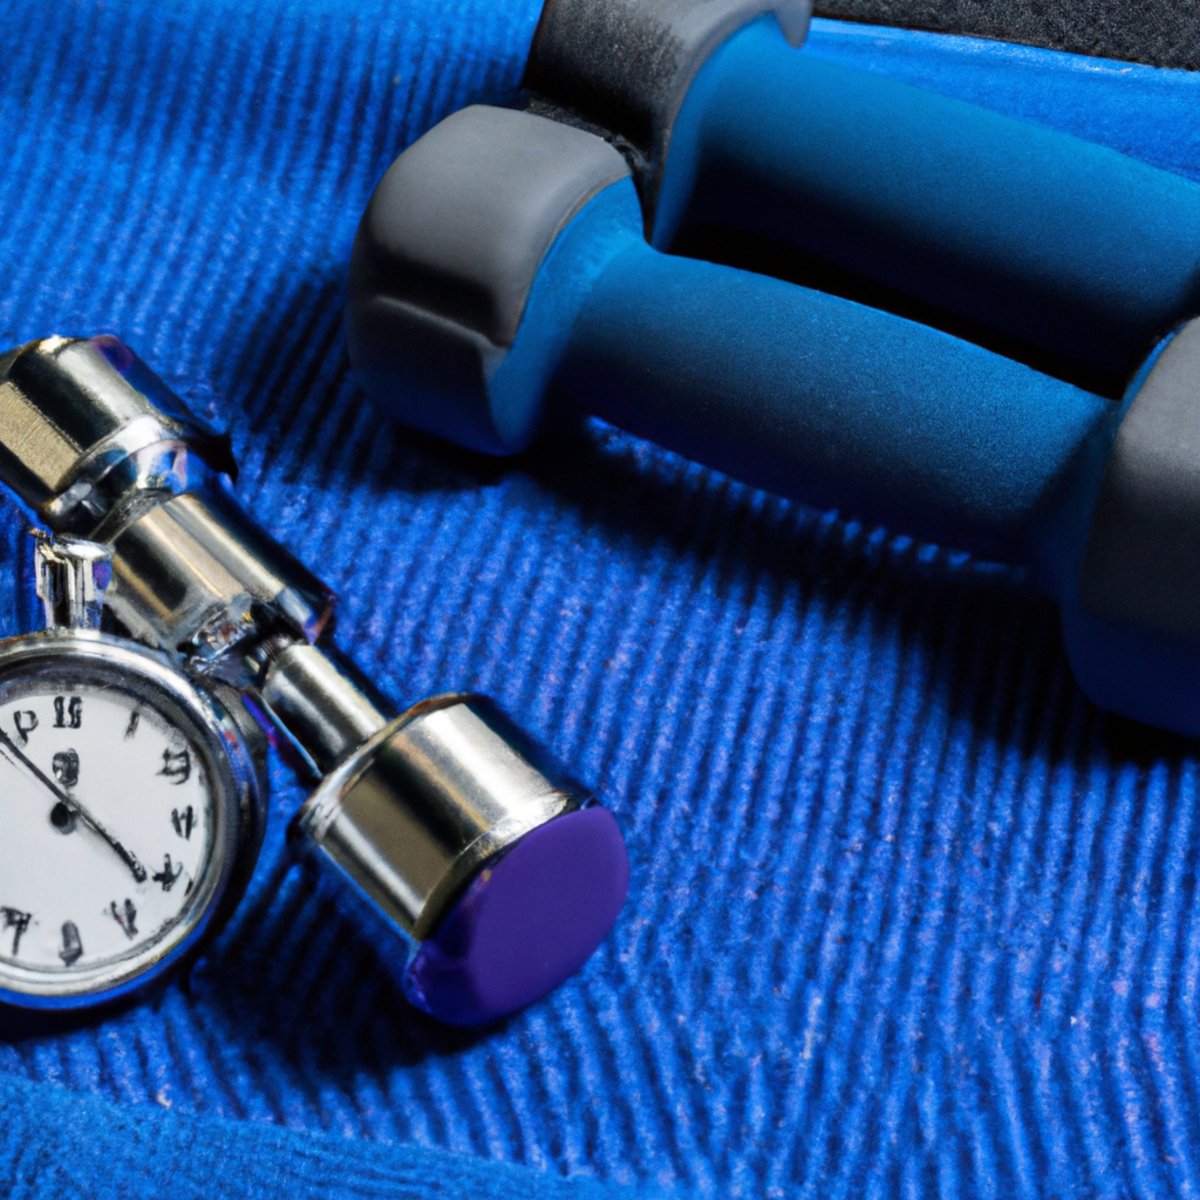 The photo captures a set of dumbbells, a stopwatch, and a sweat towel arranged neatly on a gym mat. The dumbbells are of different weights, with the heavier ones placed at the back. The stopwatch is set to zero, ready to time the high-intensity interval training (HIIT) workout. The sweat towel is folded neatly beside the dumbbells, indicating that the workout is about to begin. The lighting is bright, highlighting the texture of the gym mat and the shiny surface of the dumbbells. The photo conveys a sense of anticipation and readiness for a challenging workout.